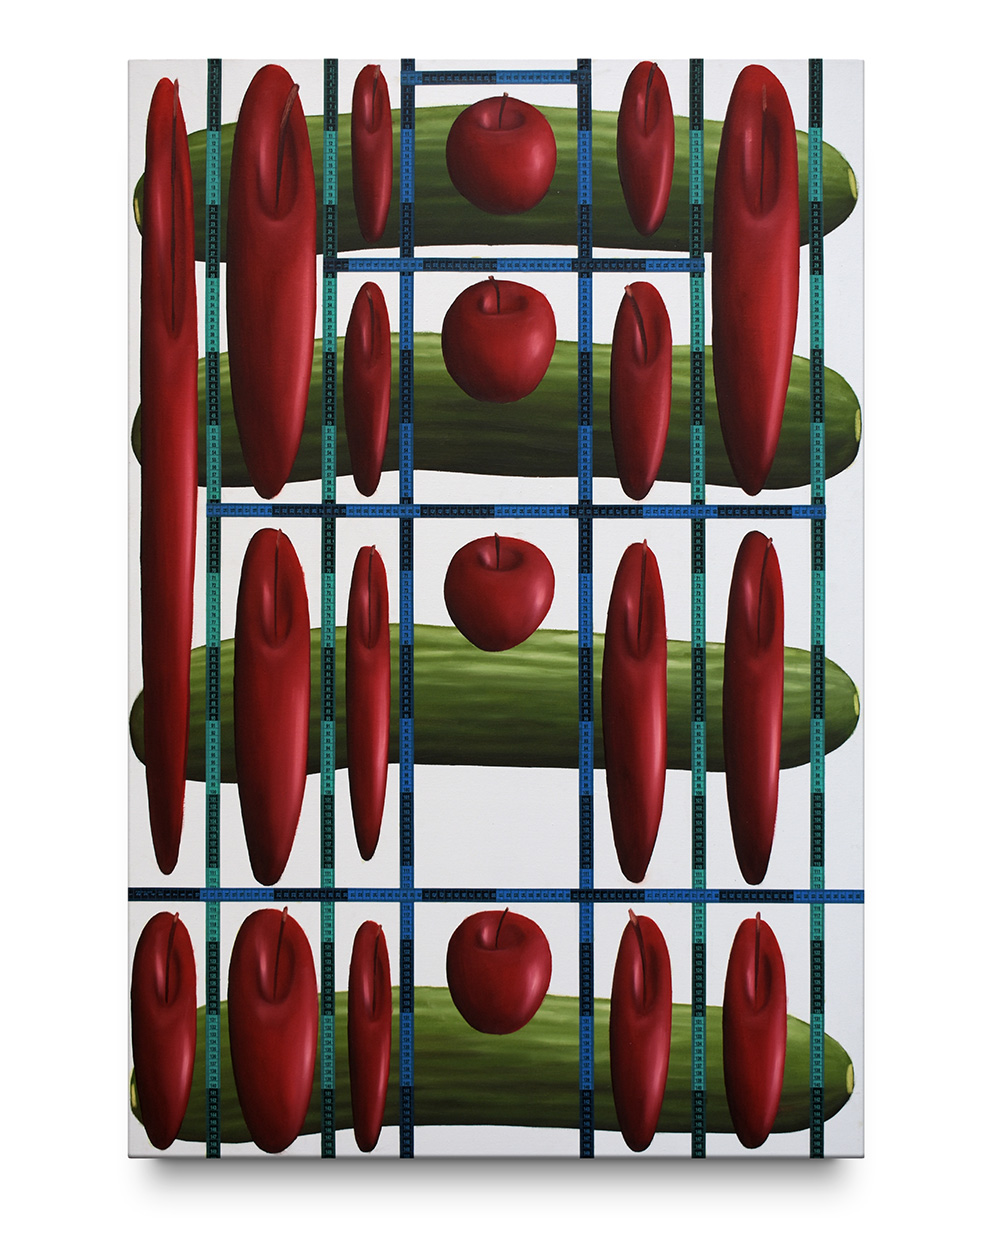 Some Apples Trapped into an Irregular Grid, 2021, Plastic tape measure and oil on canvas, 100 x 150 CM